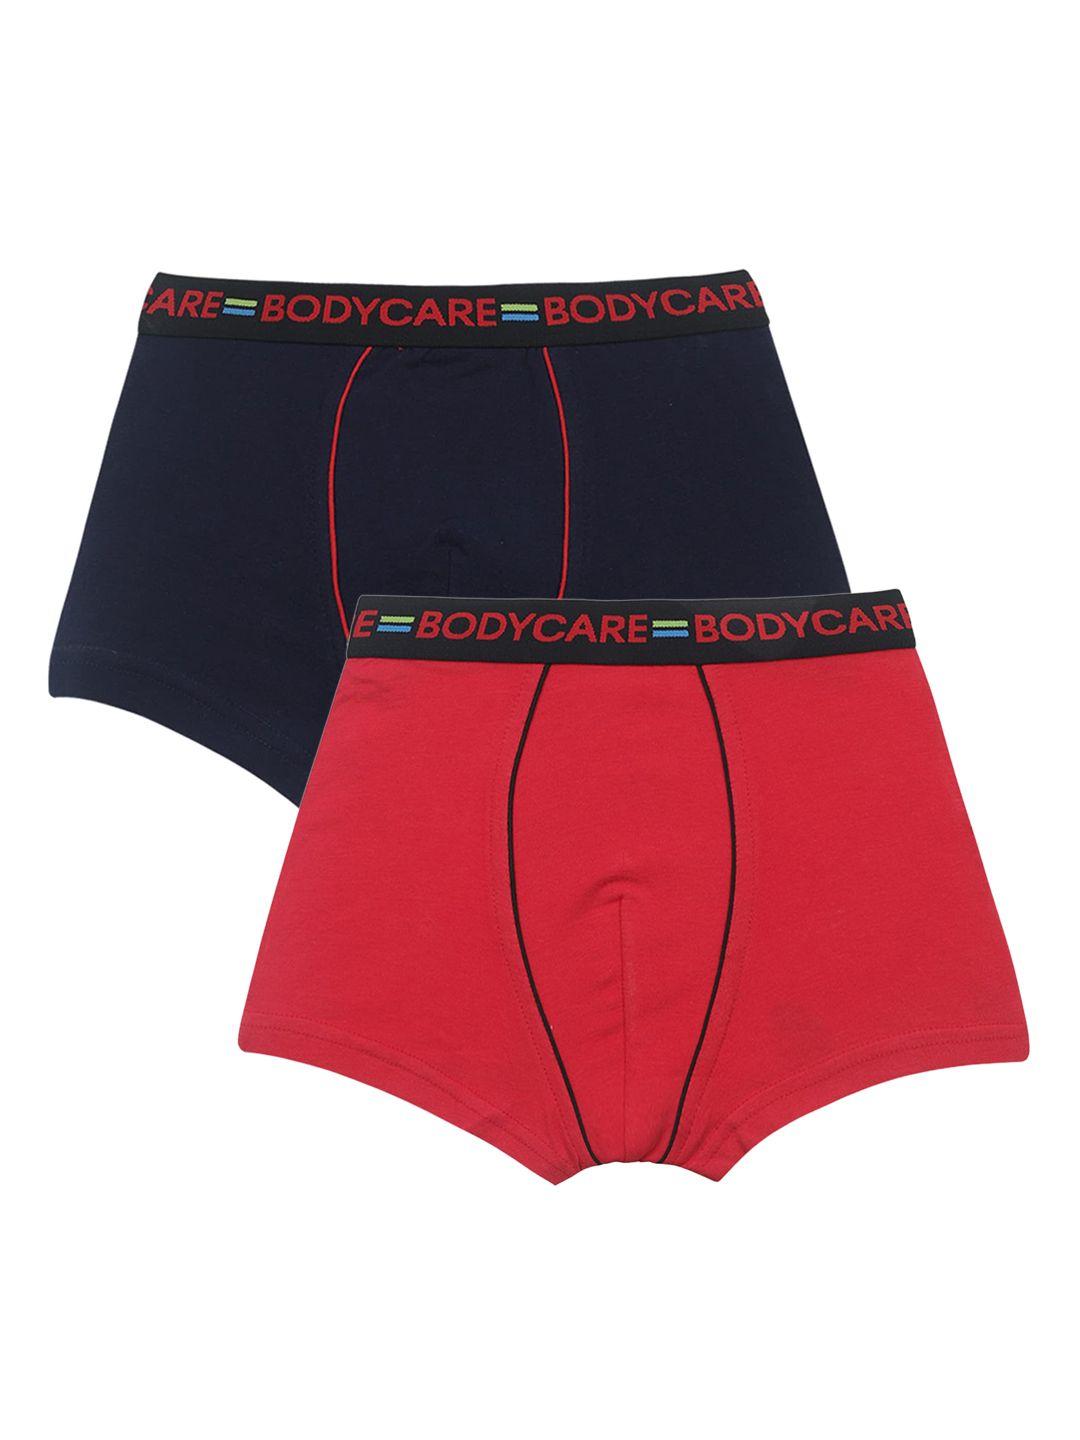 bodycare kids boys pack of 2 assorted cotton trunks kga2053c-80